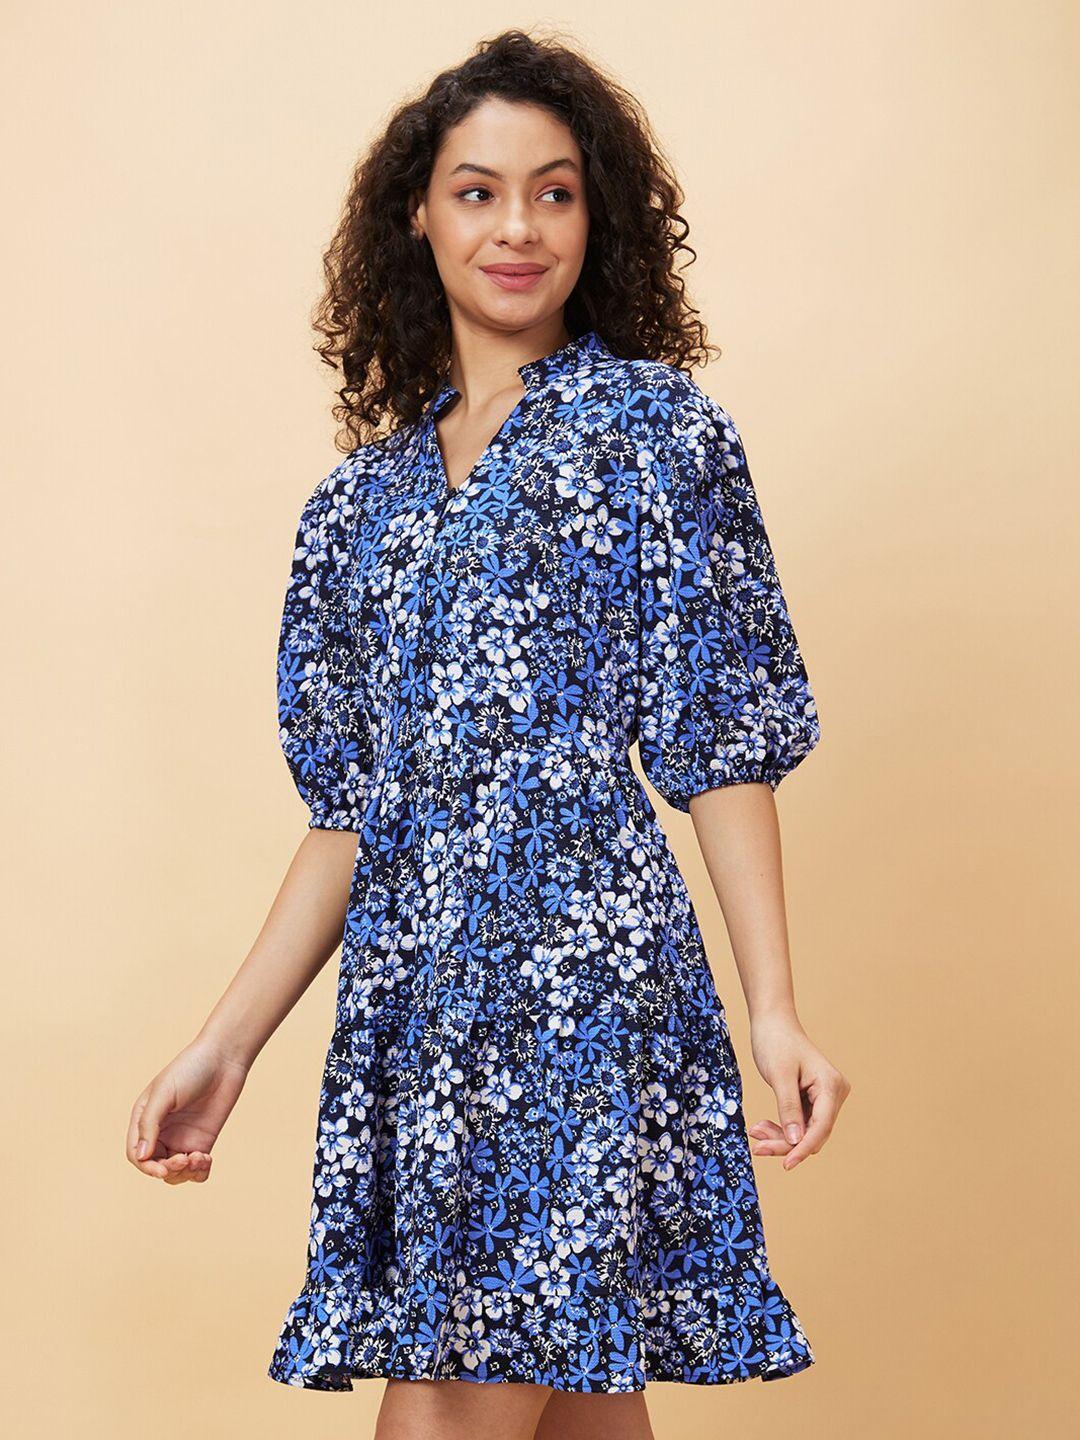 globus navy blue floral print puff sleeve fit & flare dress